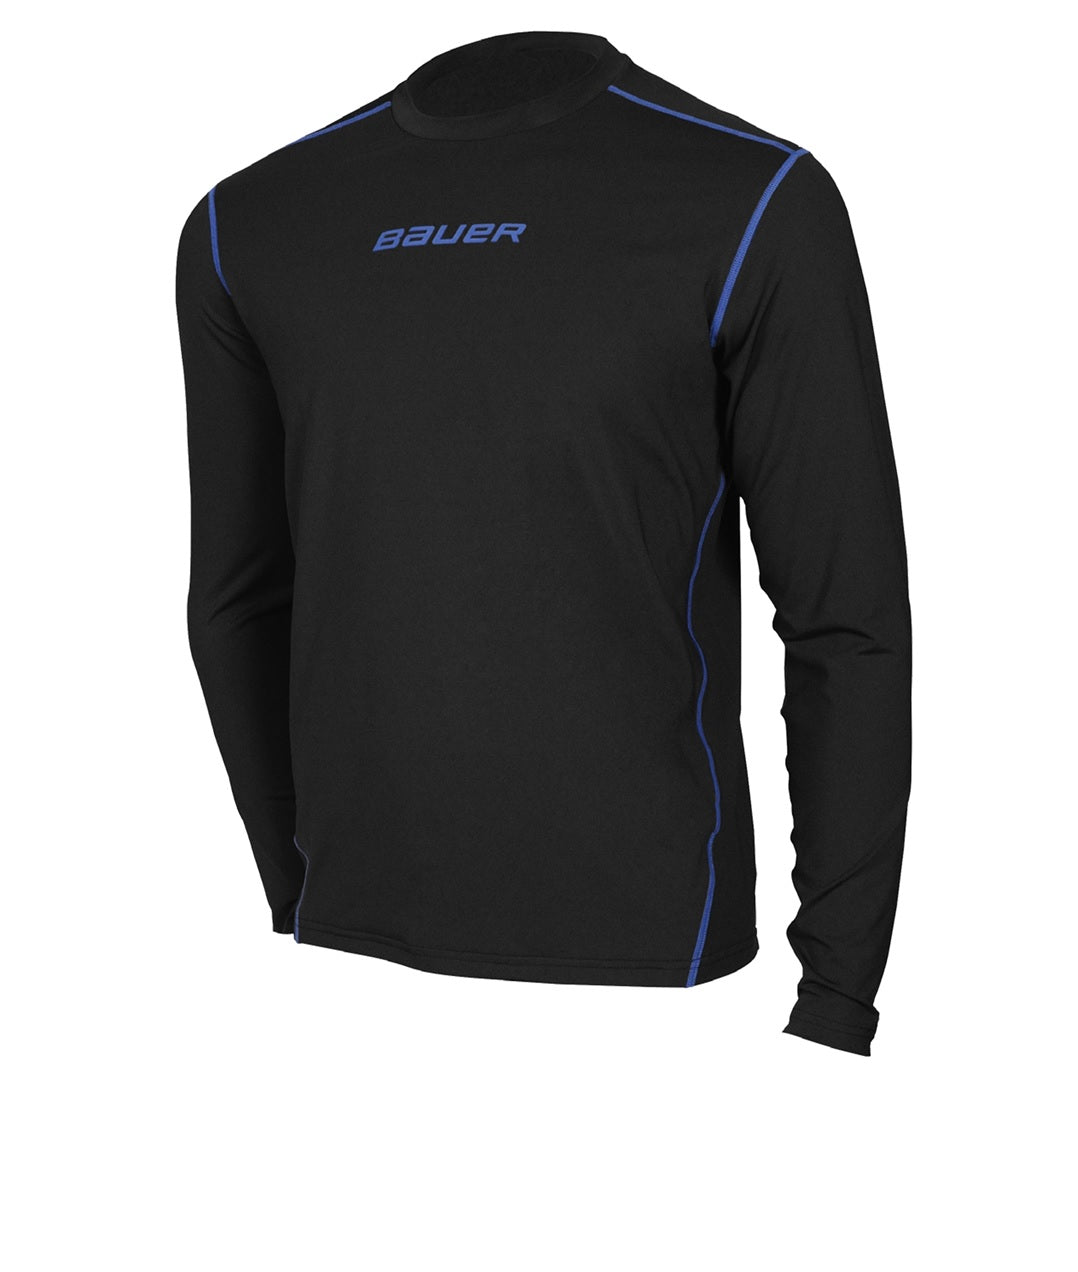 Bauer NG sweat suit top LS base layer underwear youth